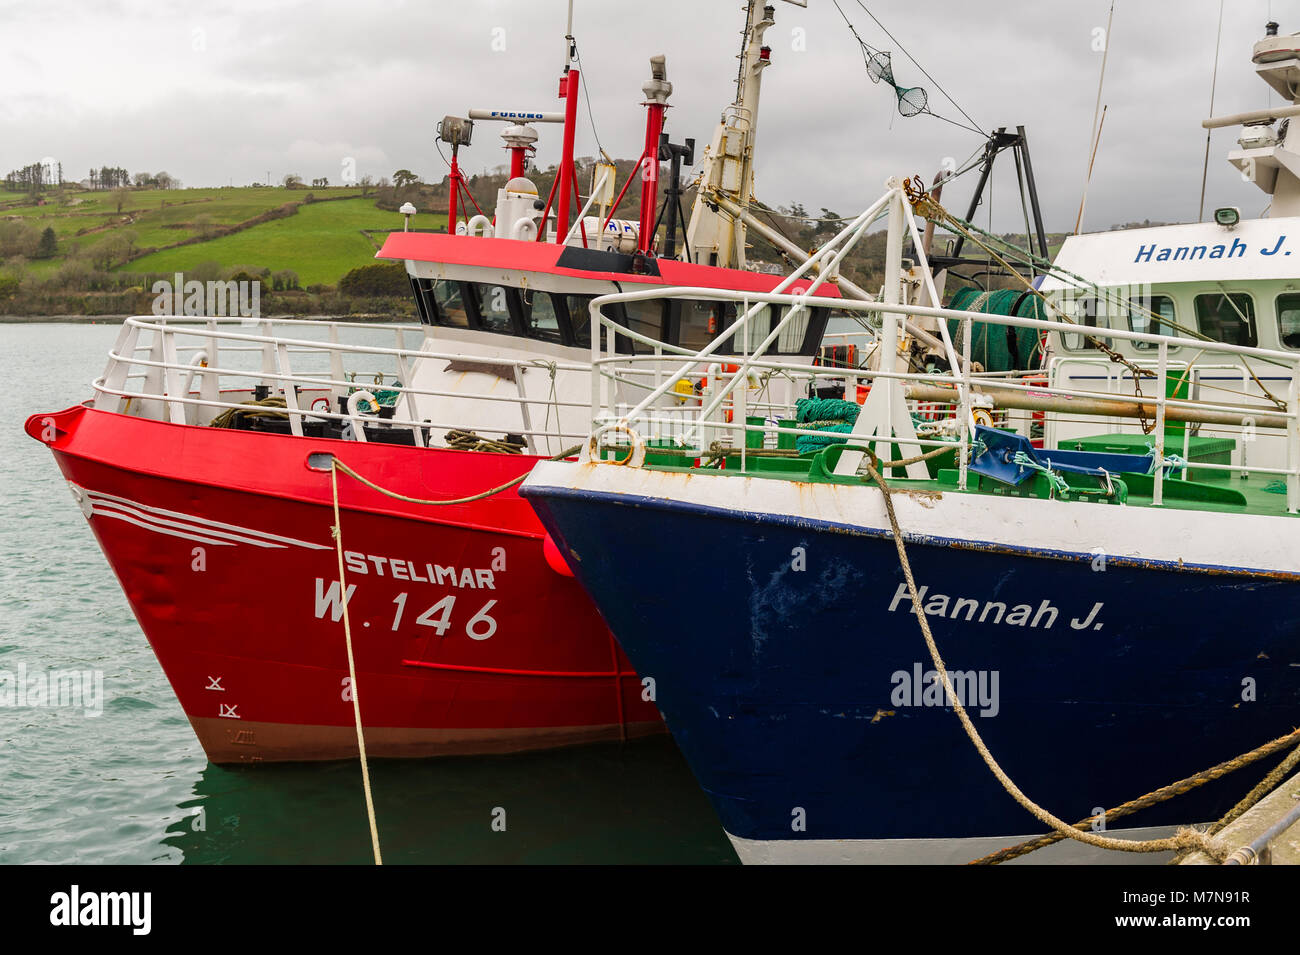 Commercial sea fishing trawlers moored in Union Hall Harbour, West Cork, Ireland. Stock Photo